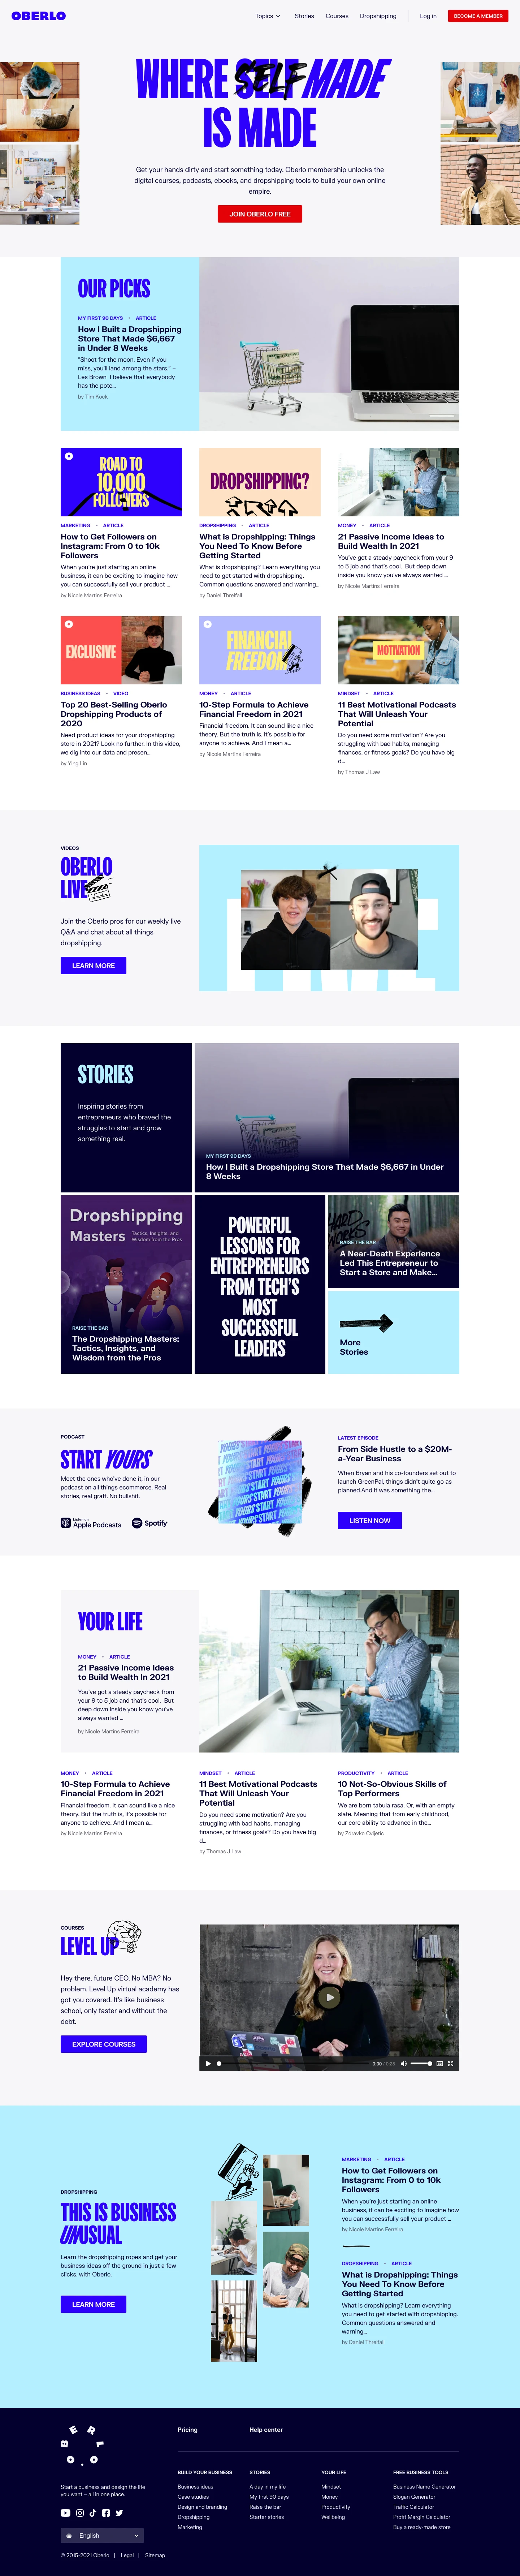 Oberlo Landing Page Example: Get your hands dirty and start something today. Oberlo membership unlocks the digital courses, podcasts, ebooks, and dropshipping tools to build your own online empire.